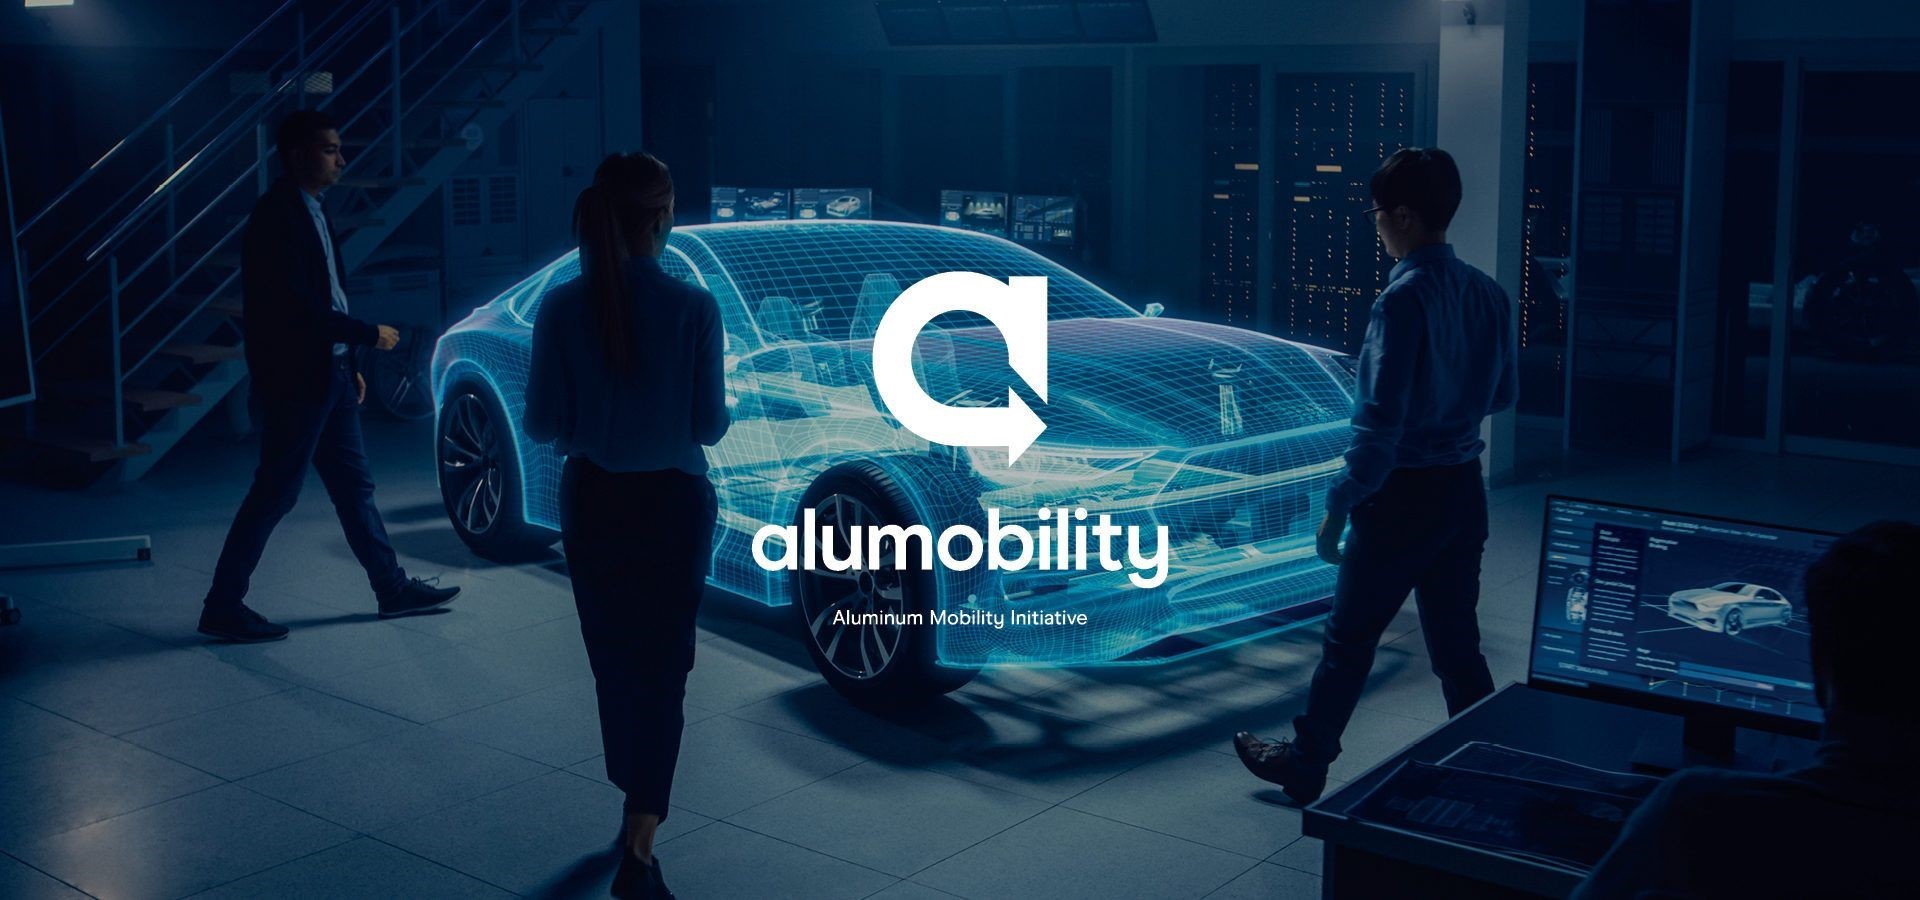 Alumobility will attend the Sustainability in Automotive Production conference in Germany